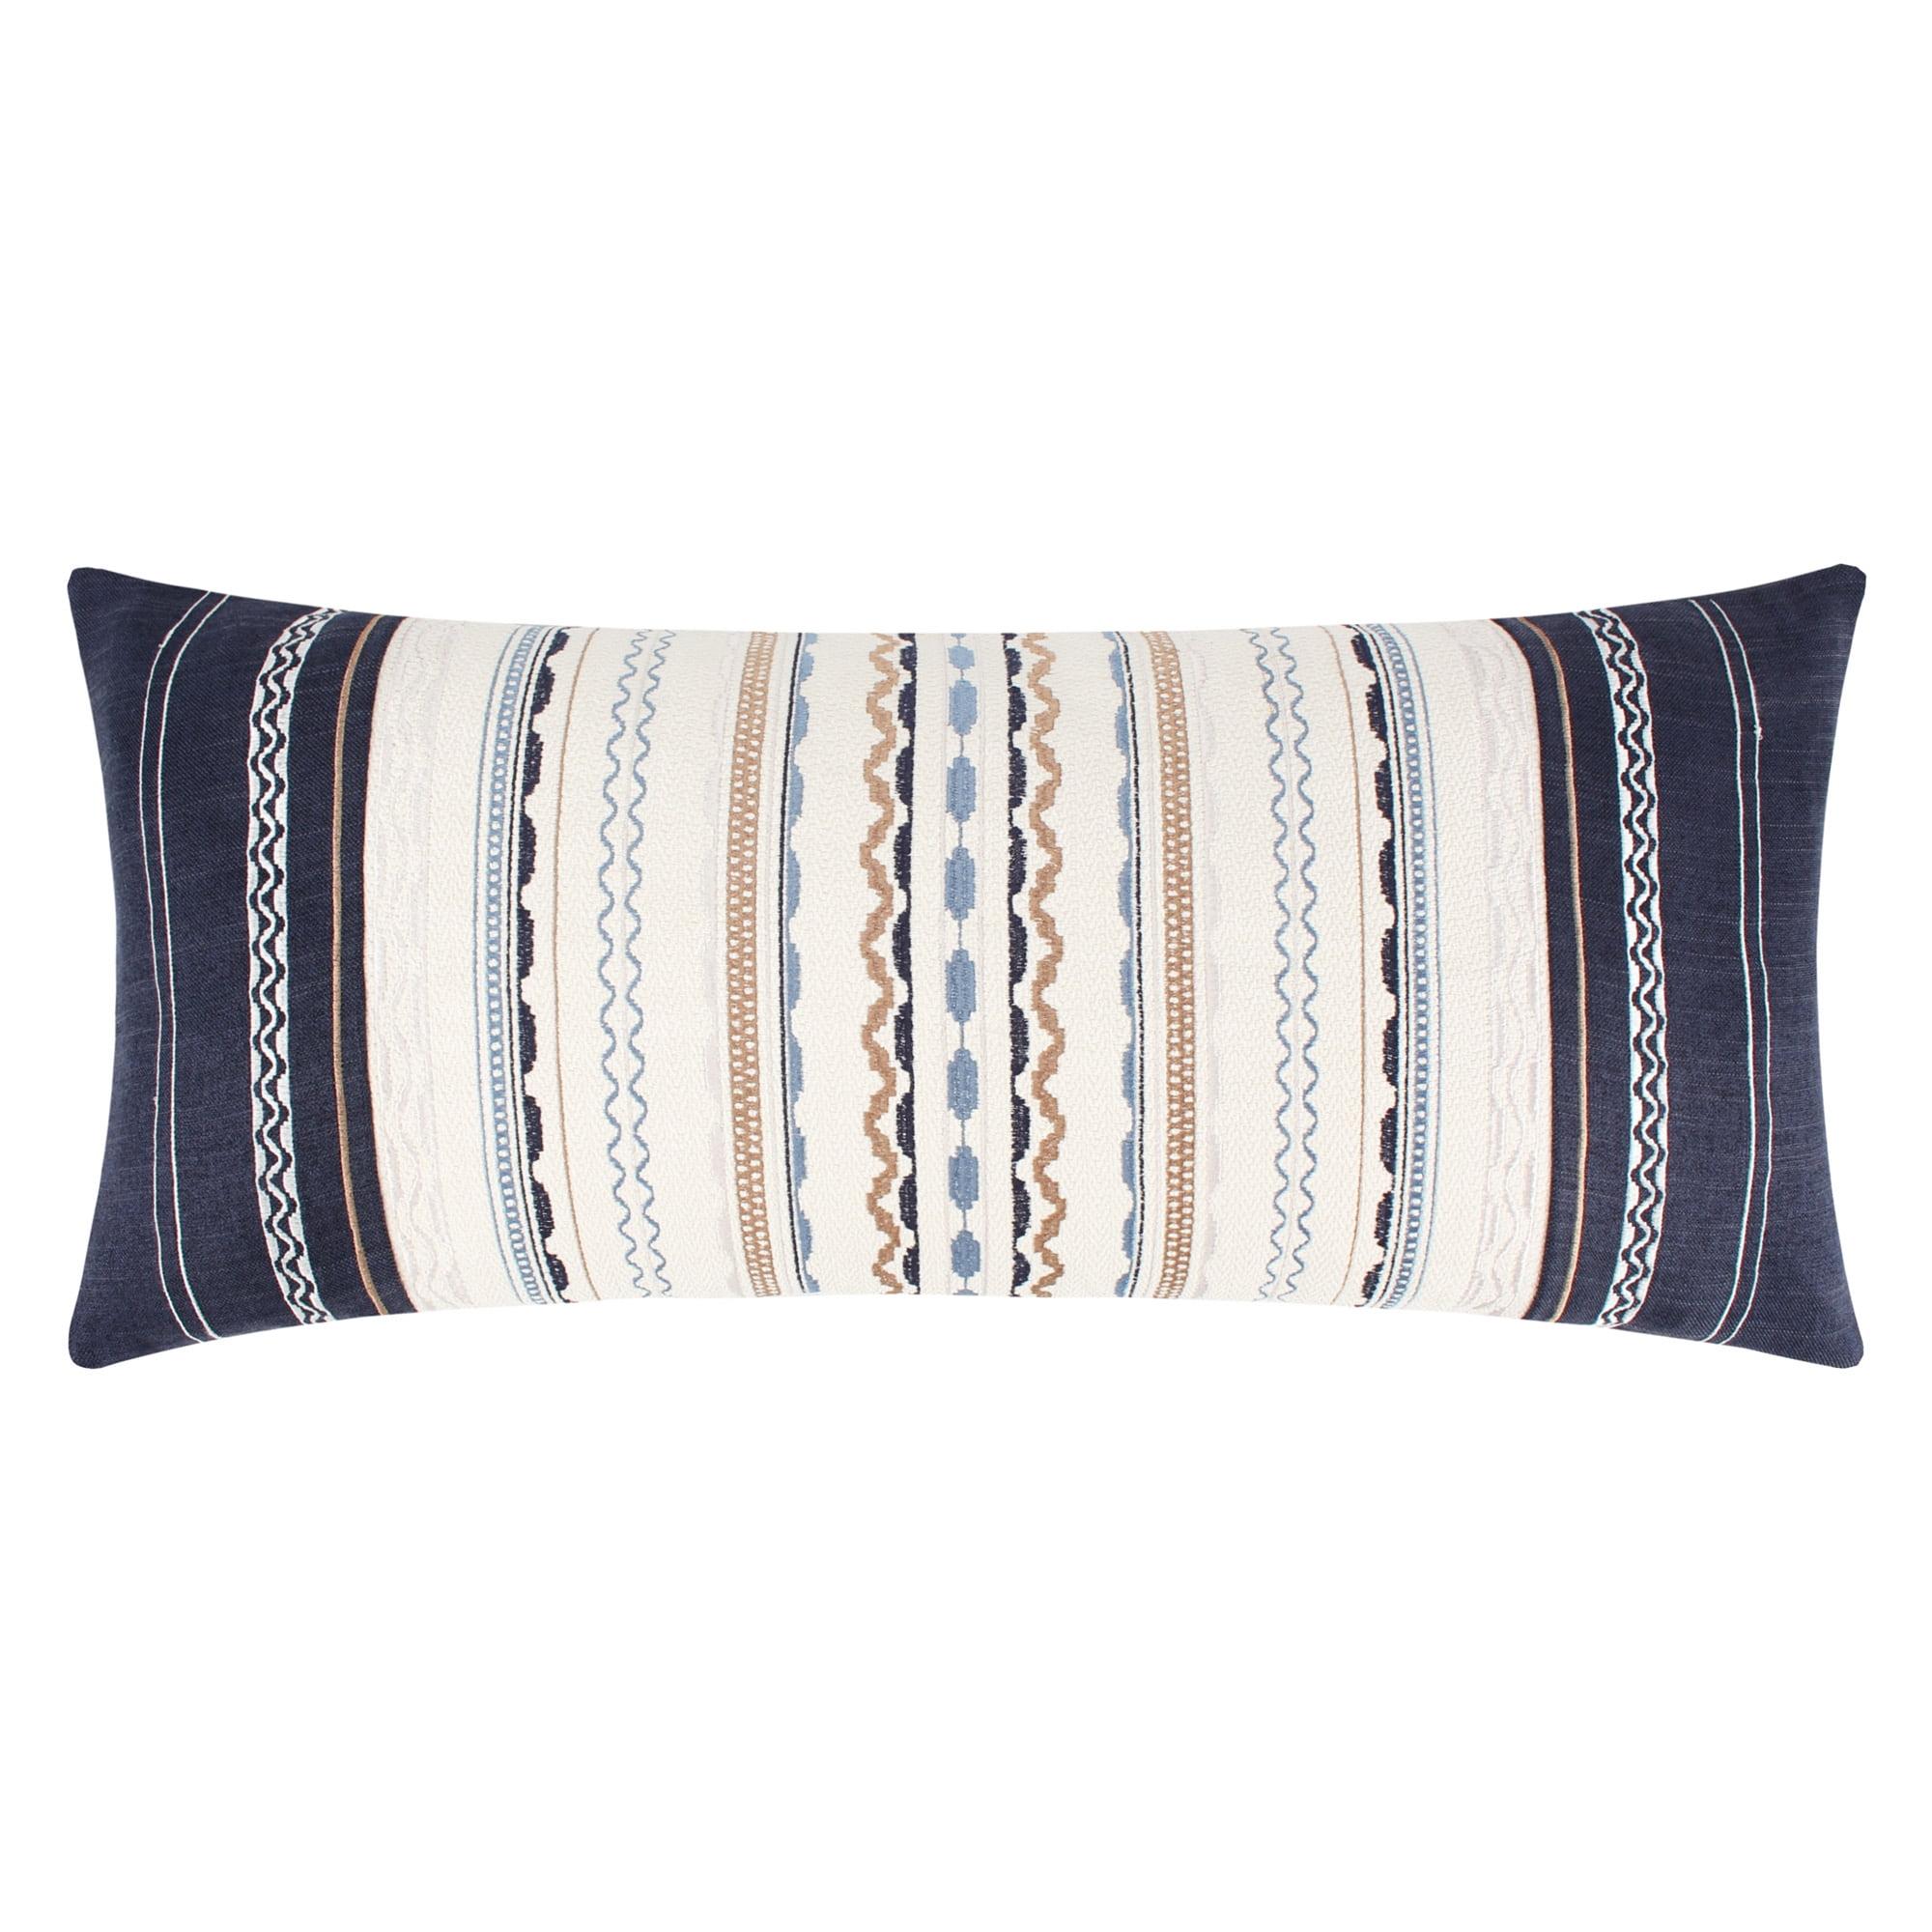 Preston Embroidered Stripe Decorative Pillow - Navy, Blue, Taupe, and Cream